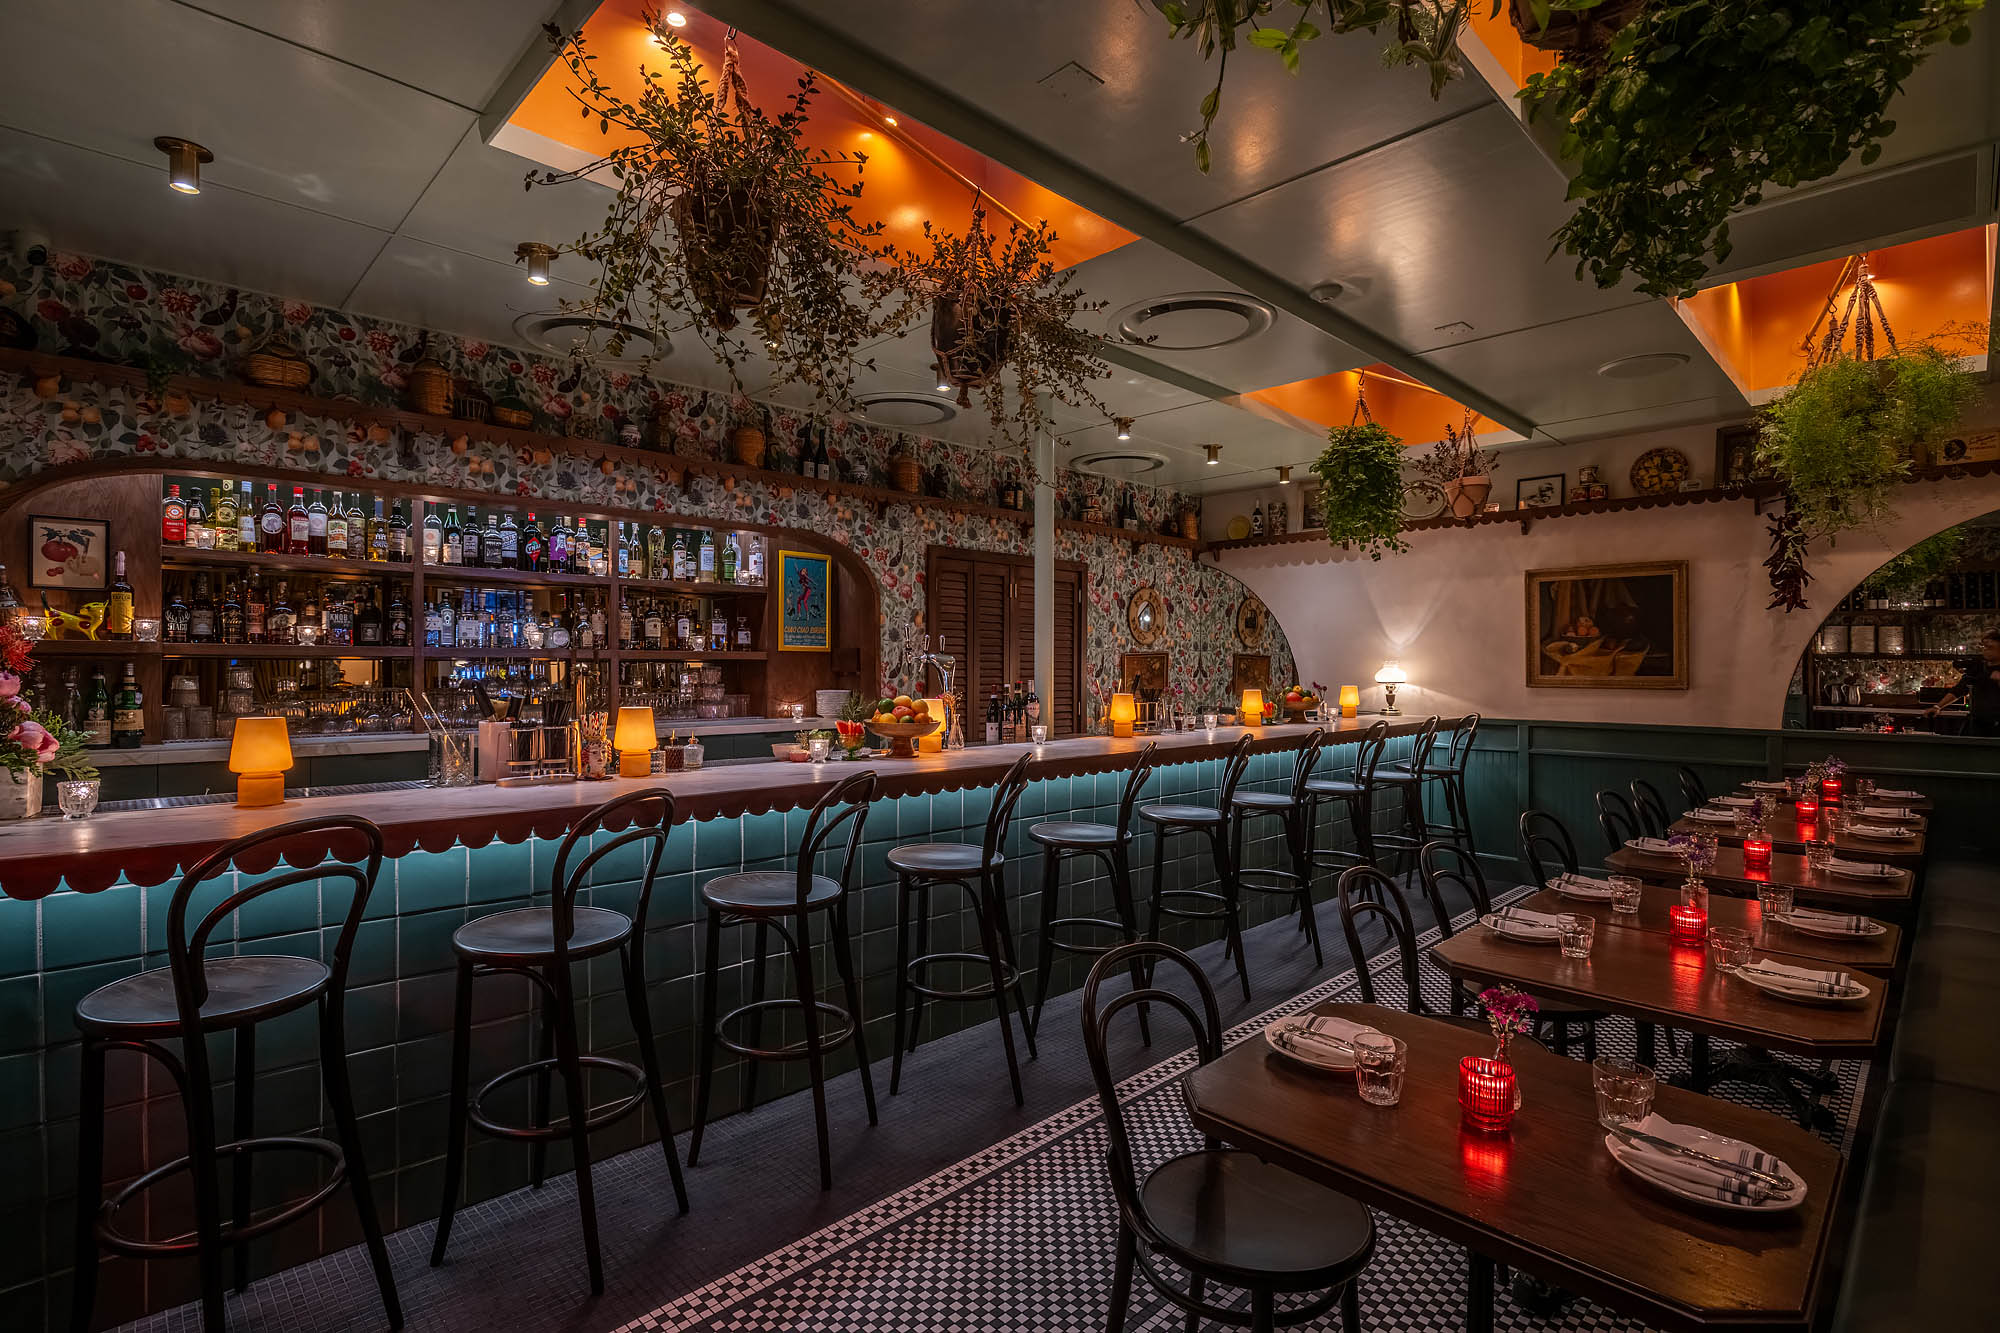 A bar with stools and tables at Donna’s restaurant in Echo Park, California.